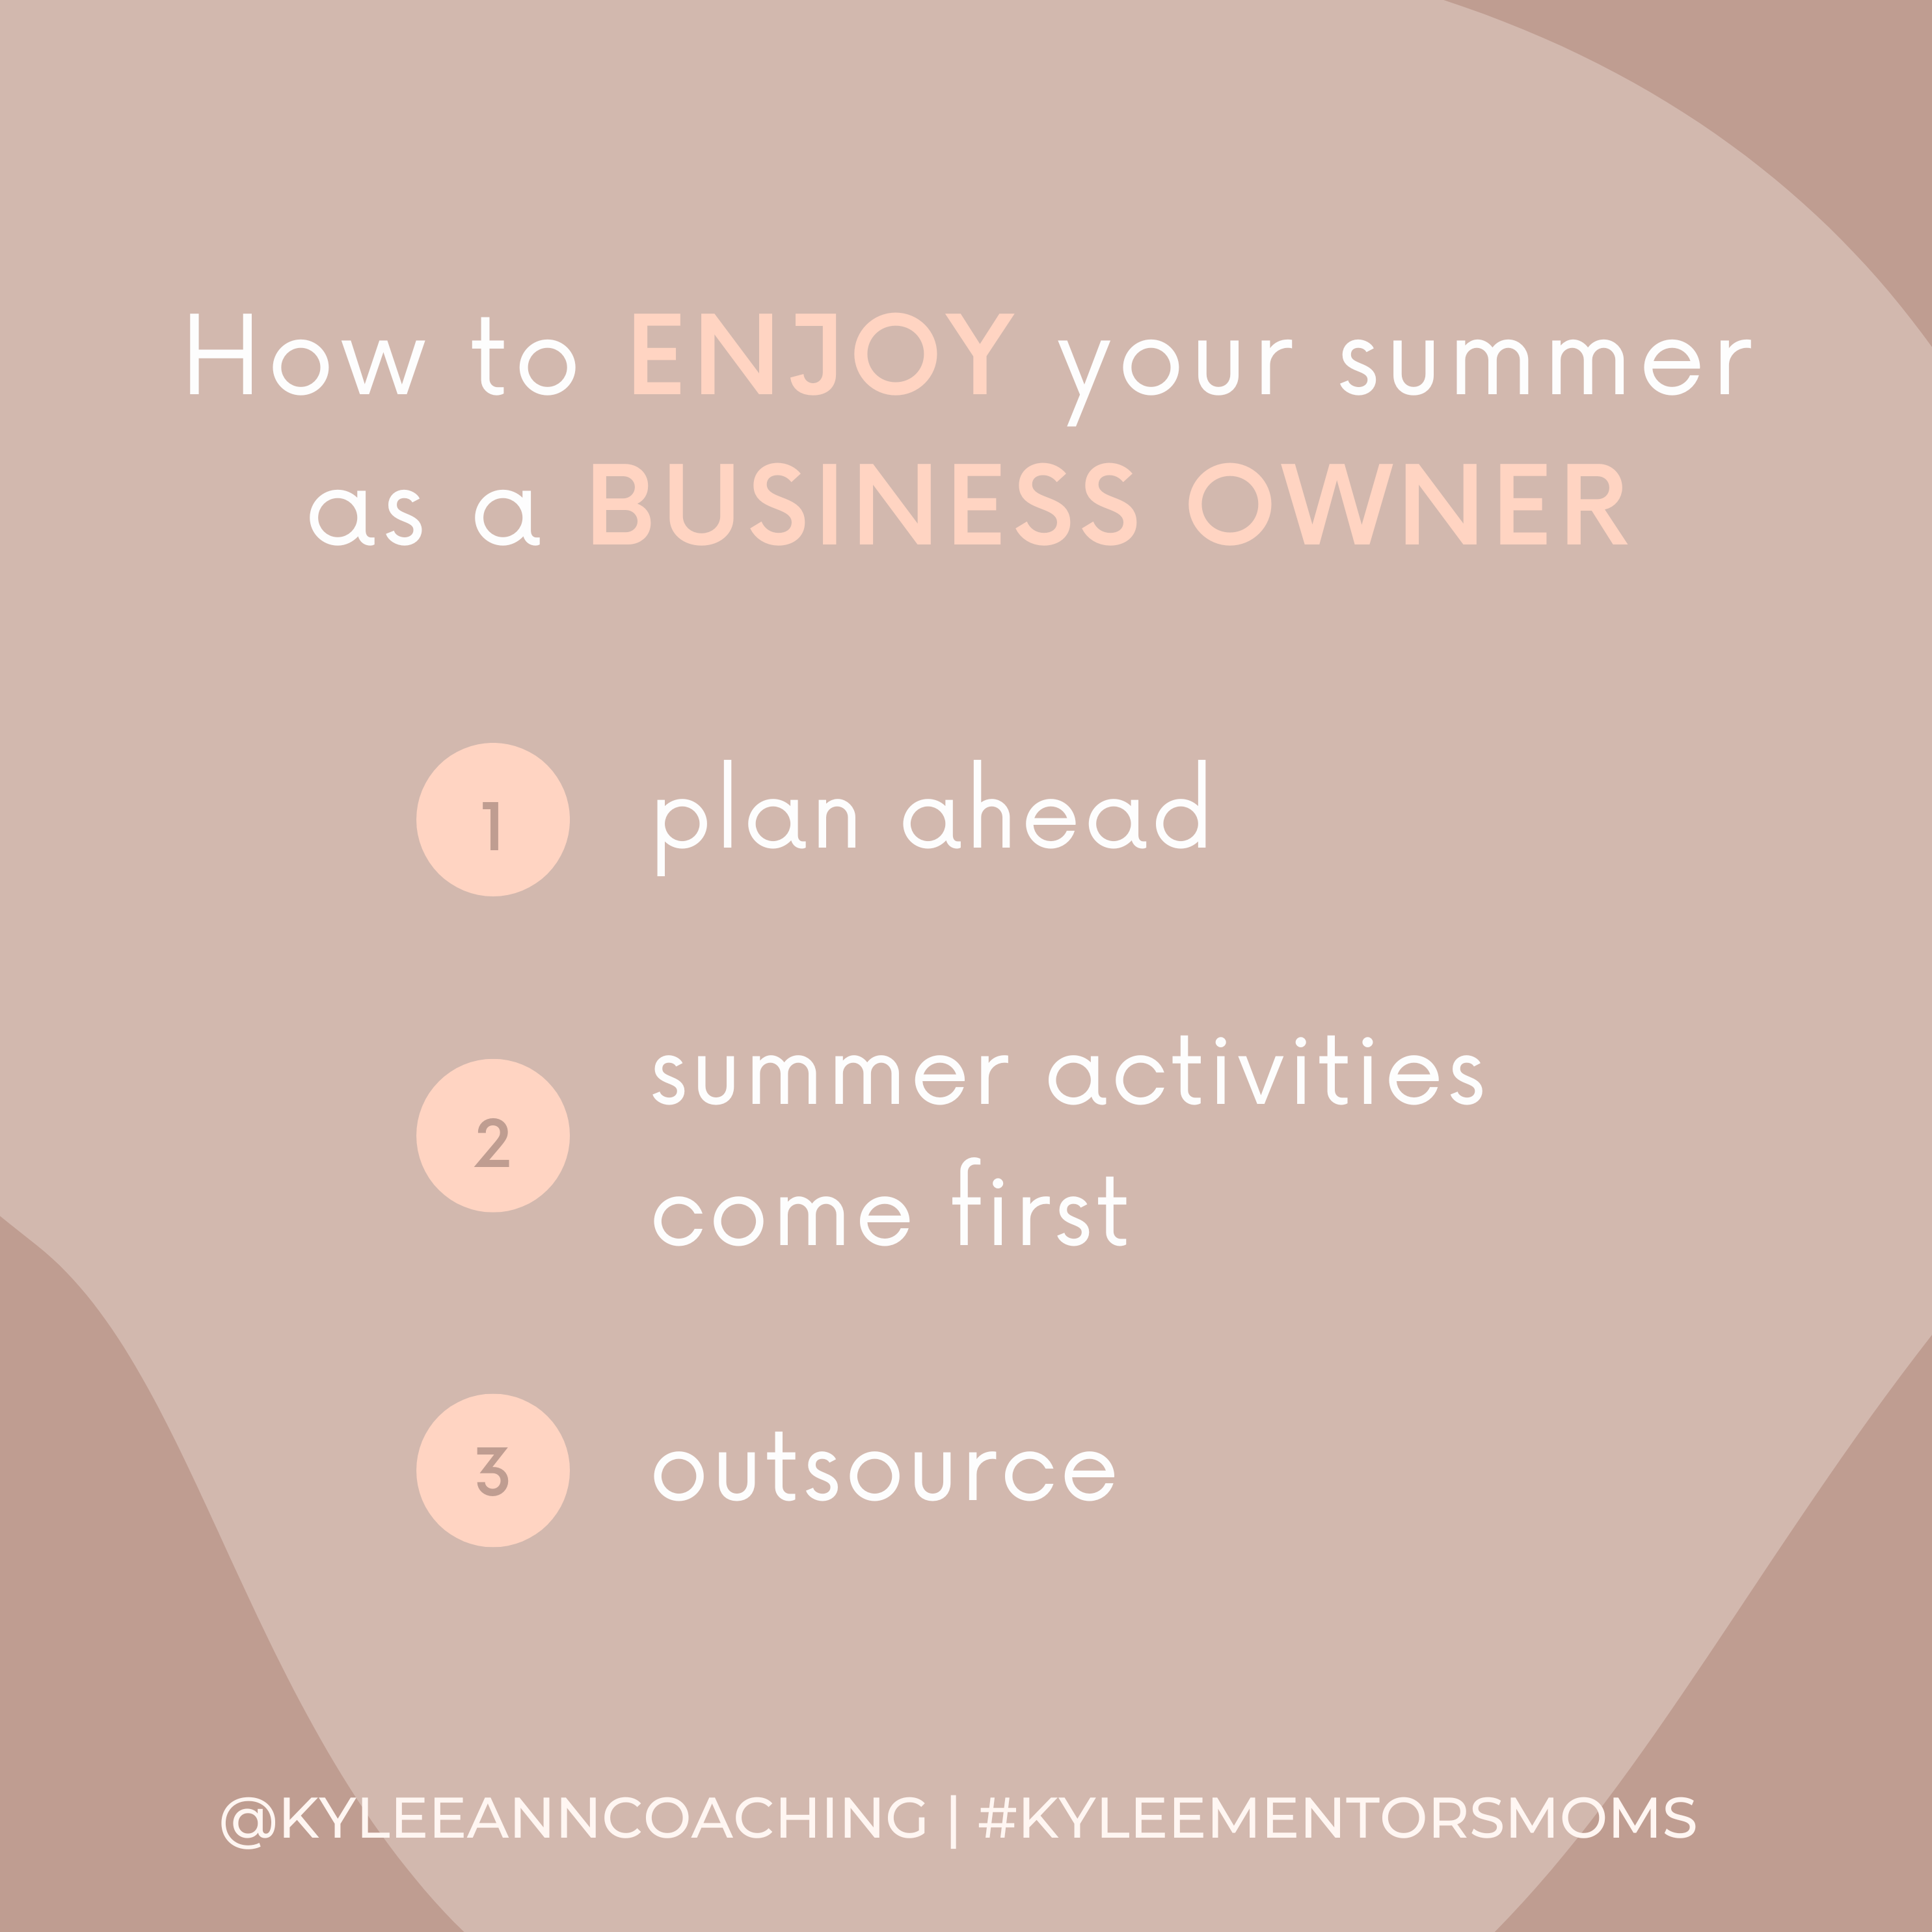 Getting Ahead of Summer Schedules